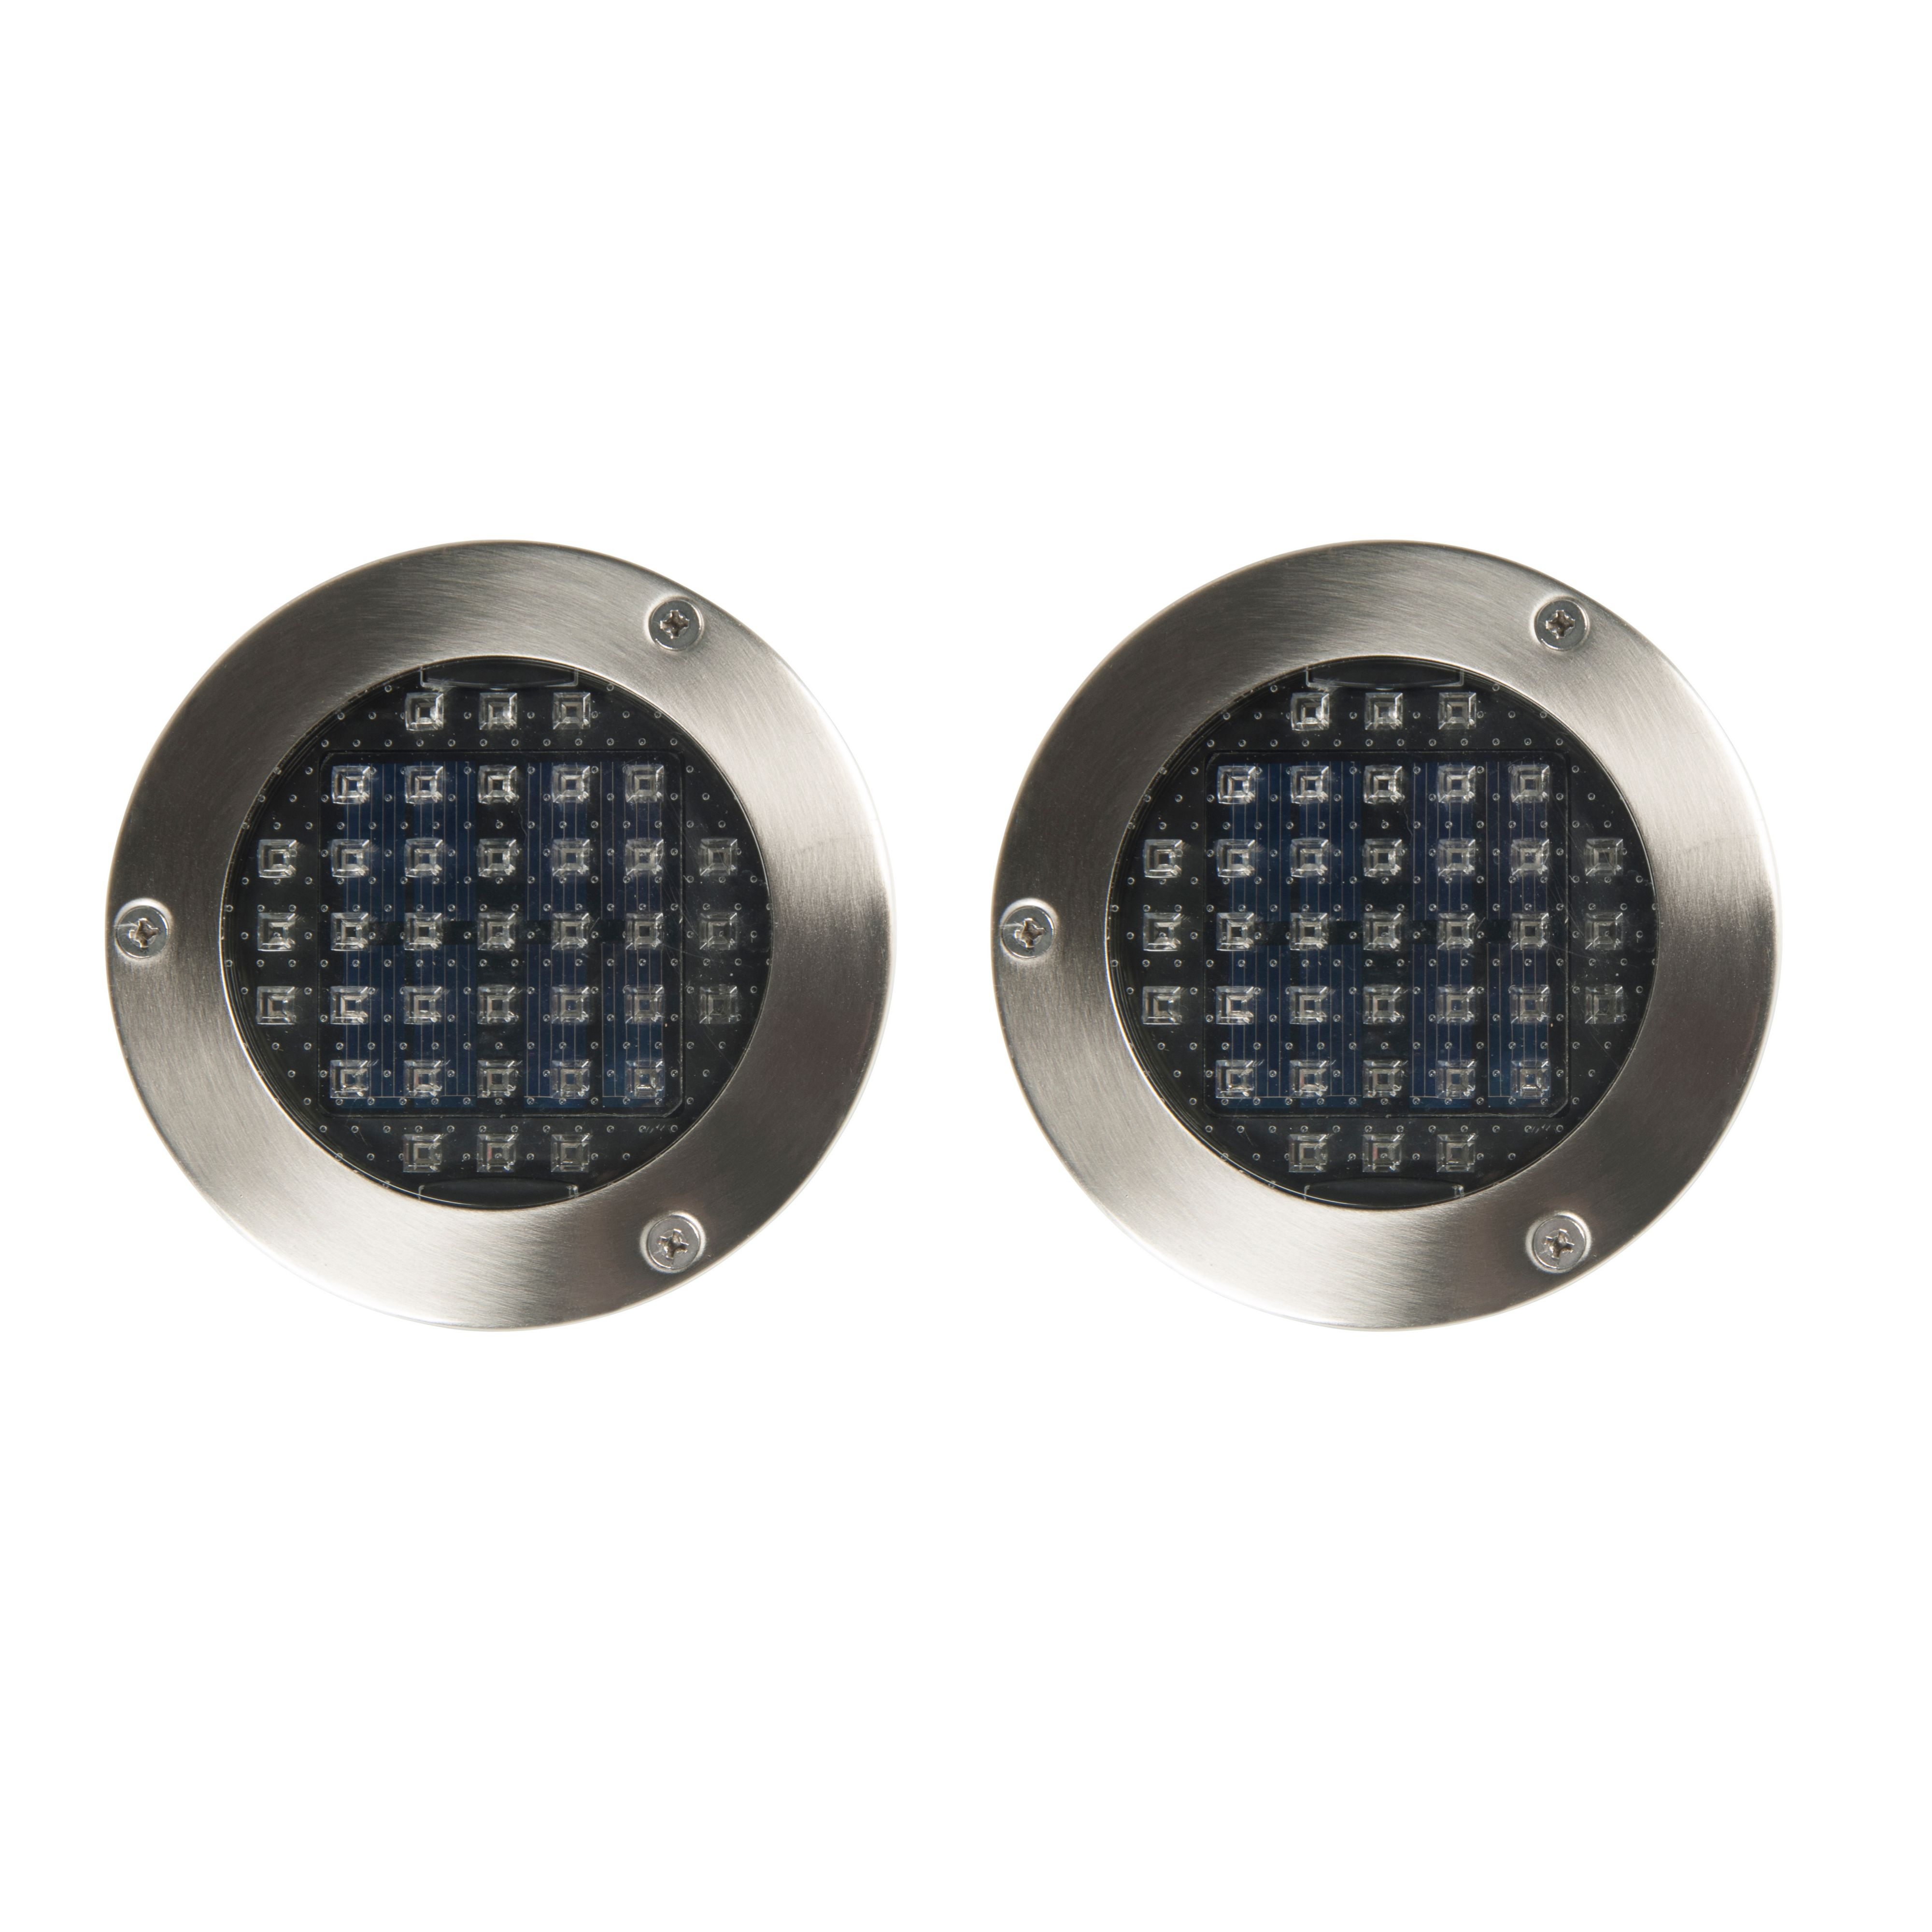 Blooma Lelantos Silver Effect Led External Solar Deck Light Pack Of 2 pertaining to dimensions 4000 X 4000